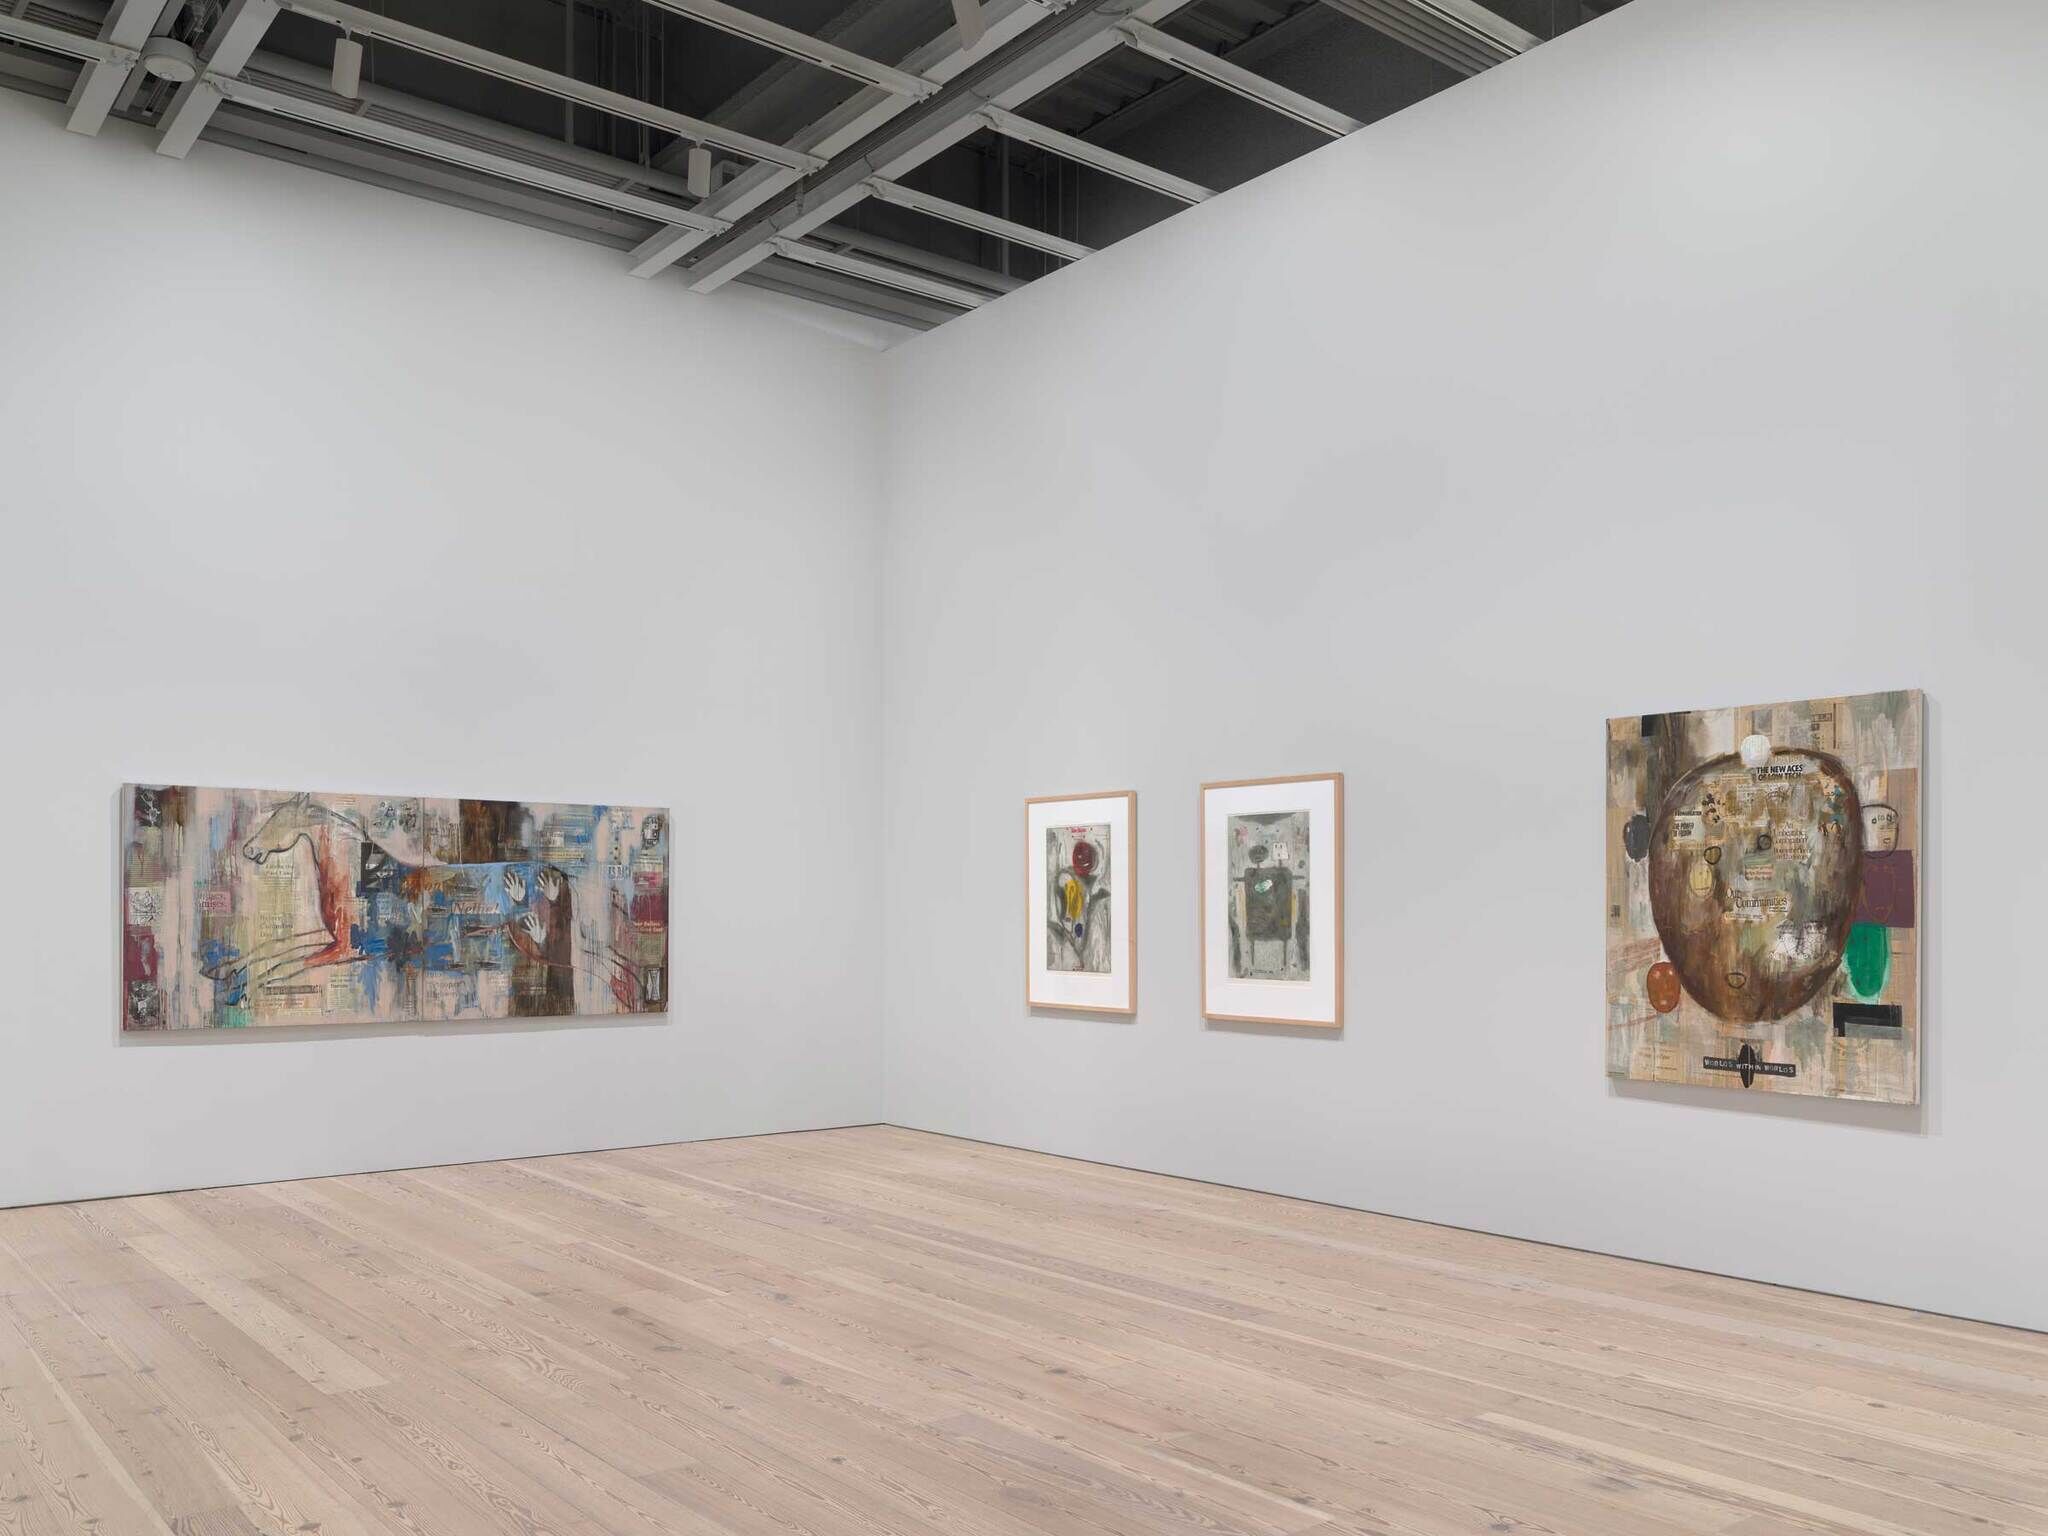 From left to right: a landscape painting with a horse lying down, two gray abstract paintings with wooden frames, and a painting with a circle and abstract shapes inside.